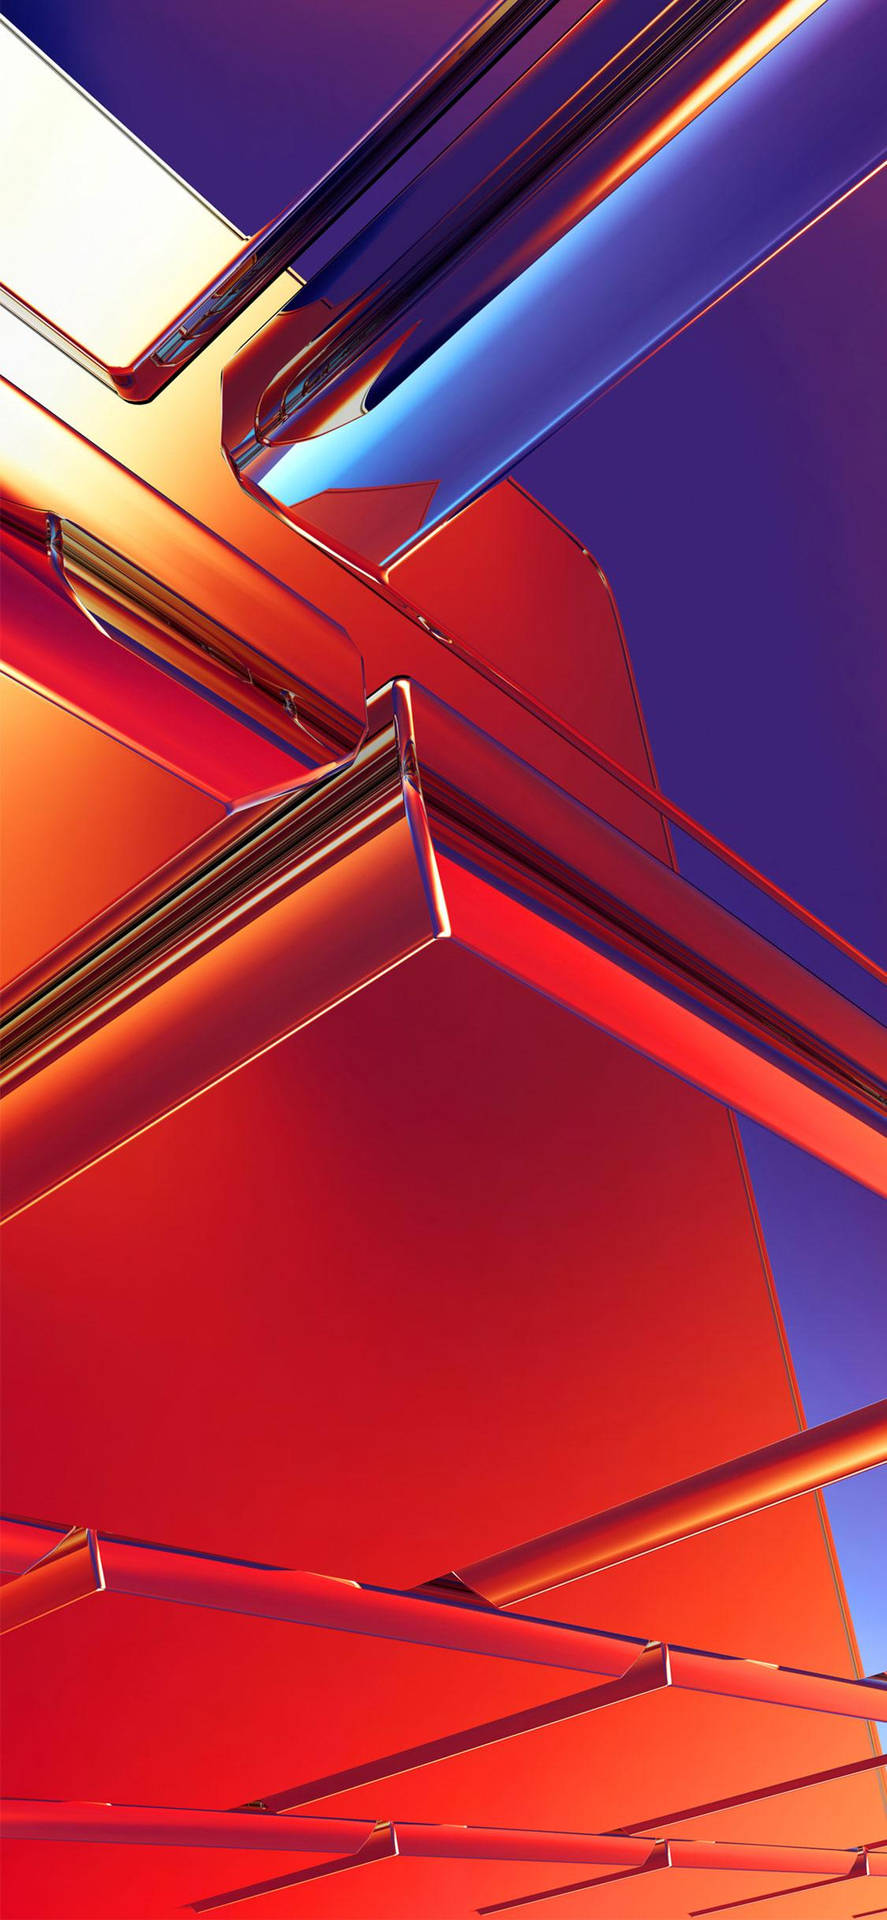 Cool Iphone Xs Max Abstract Structures Wallpaper